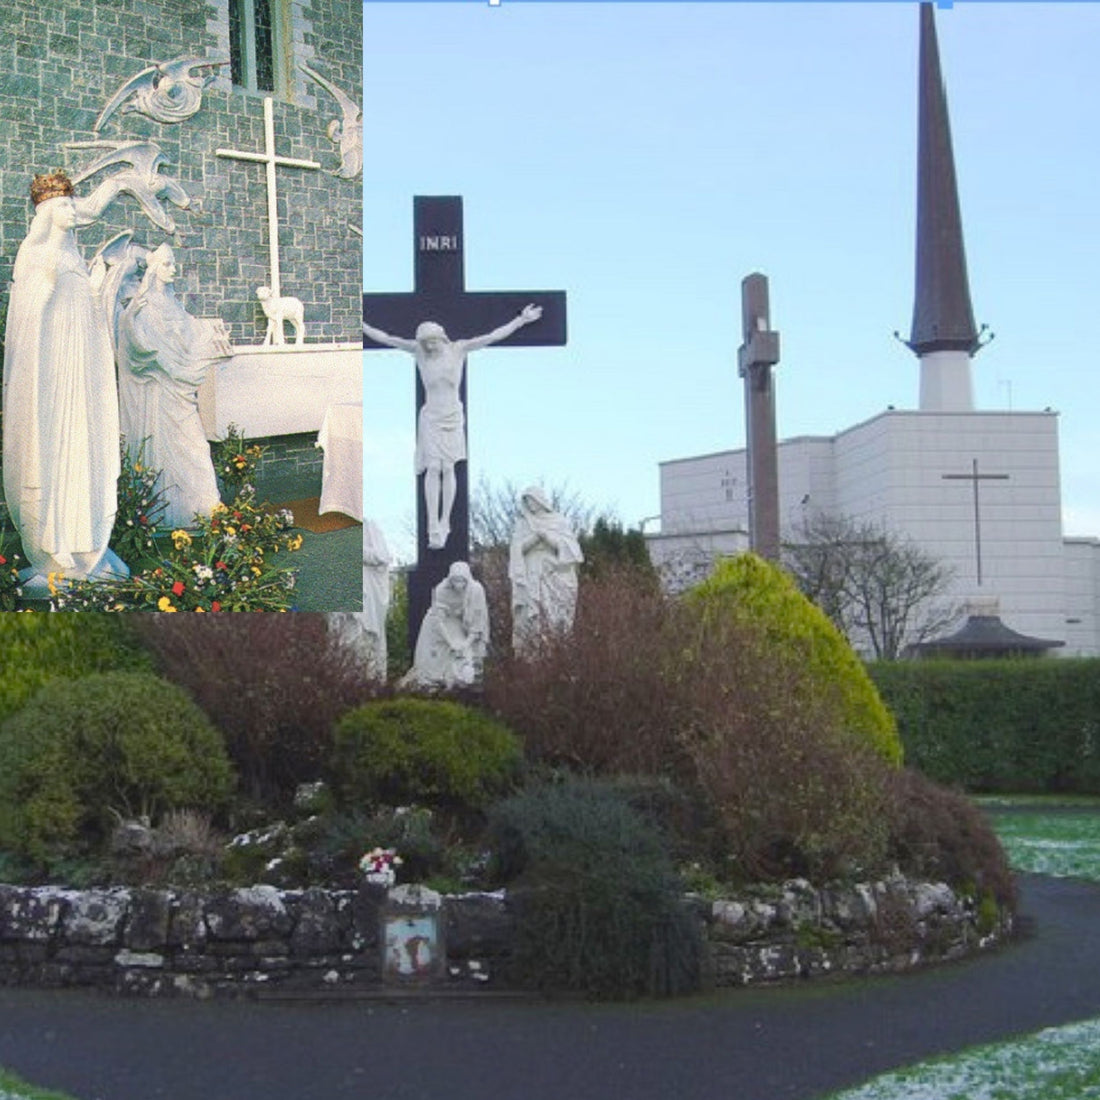 What happened at the Apparition in Knock Ireland